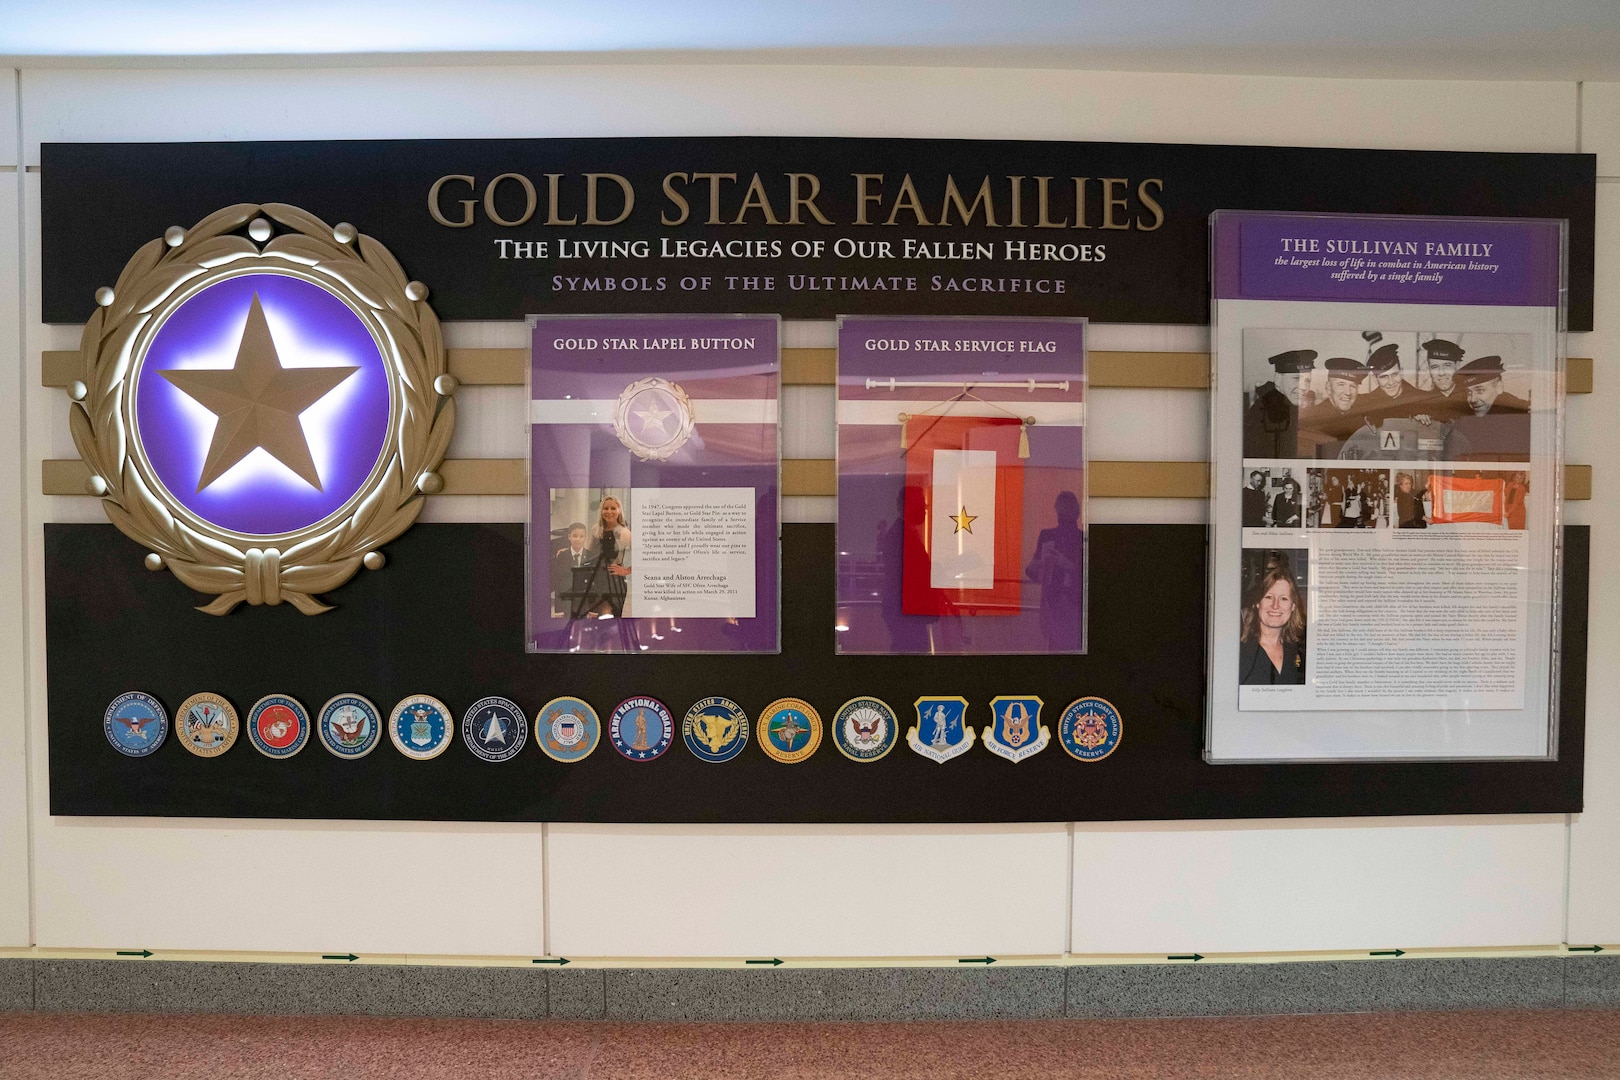 A photograph shows a display with the heading "Gold Star Families."